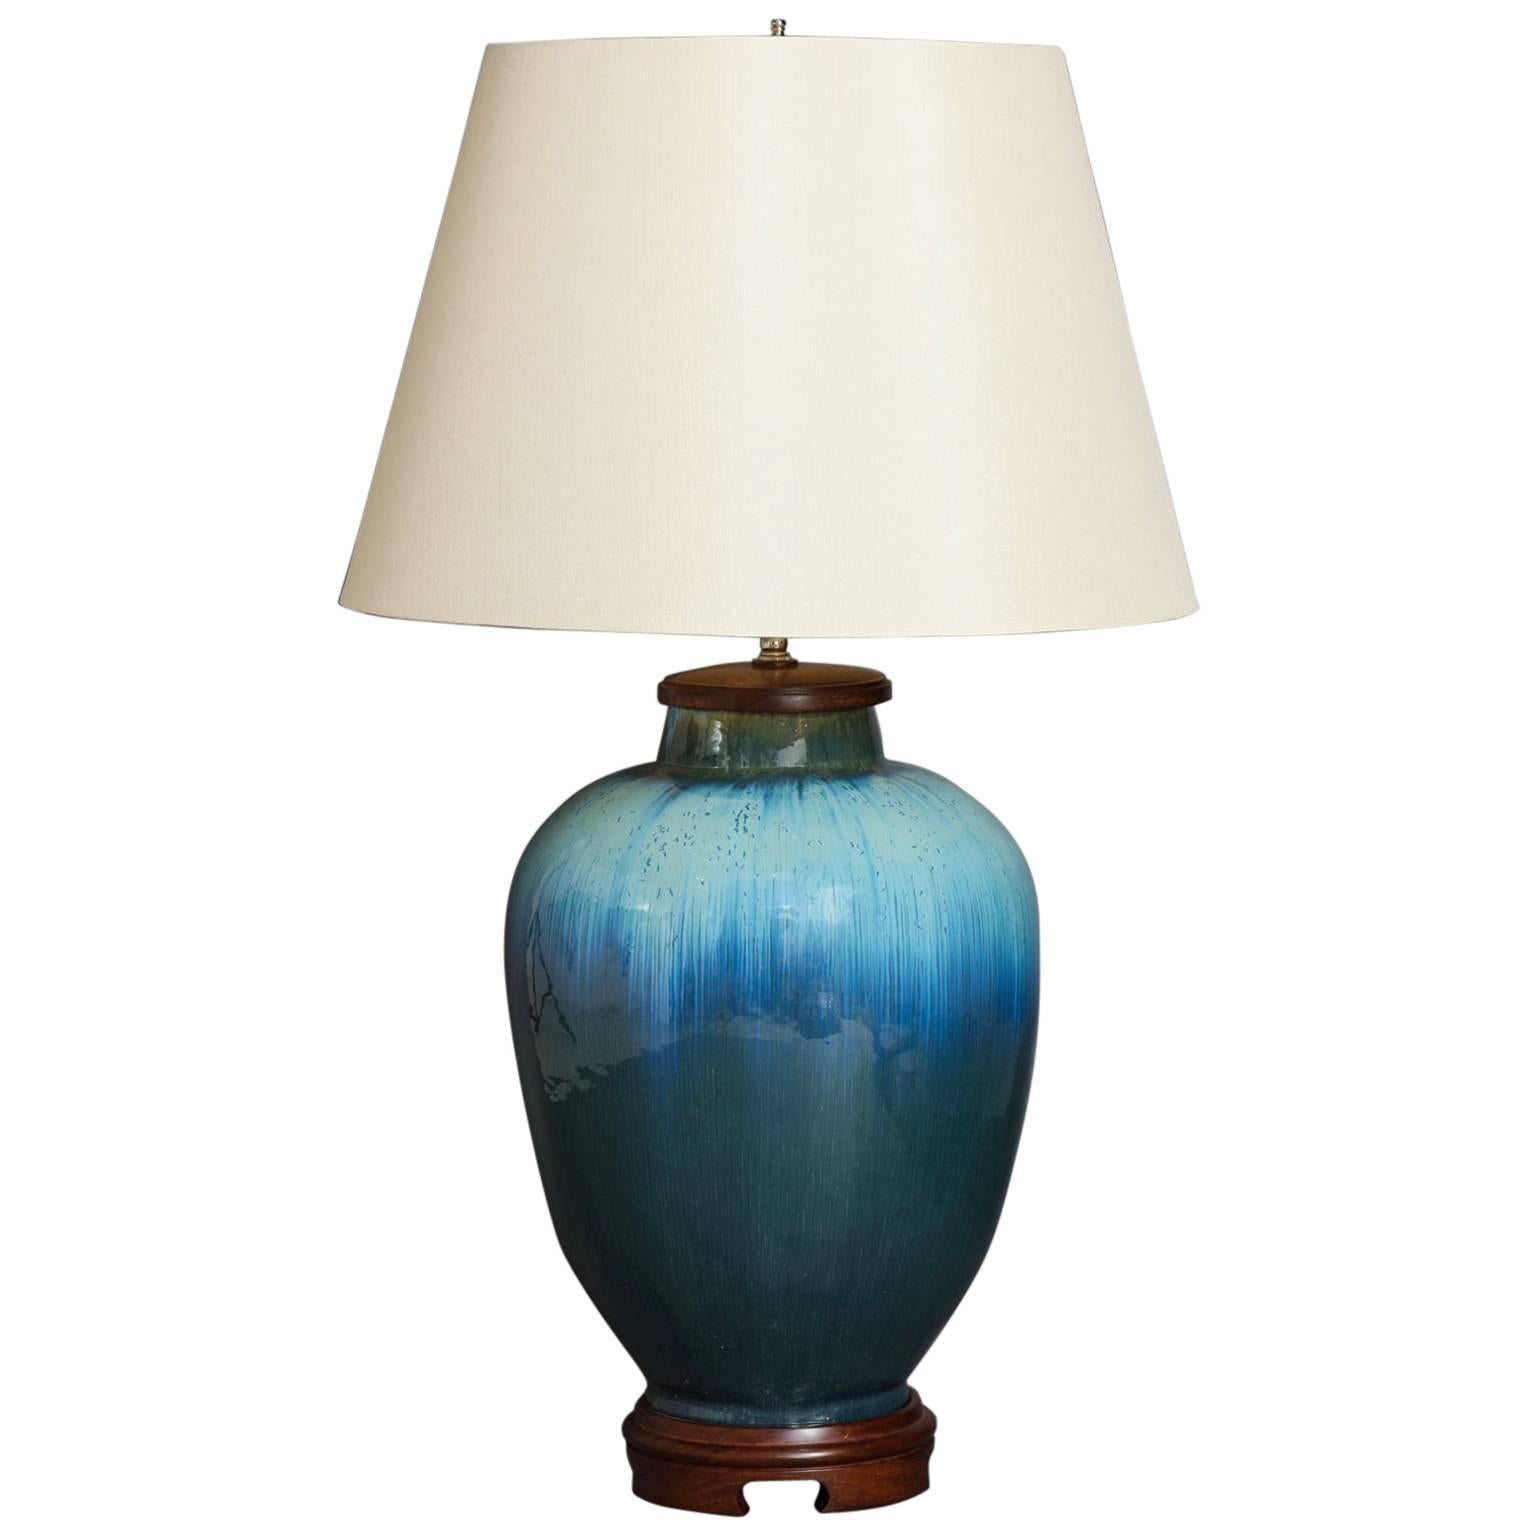 Large Deep Blue Ceramic Lamp by SCDS